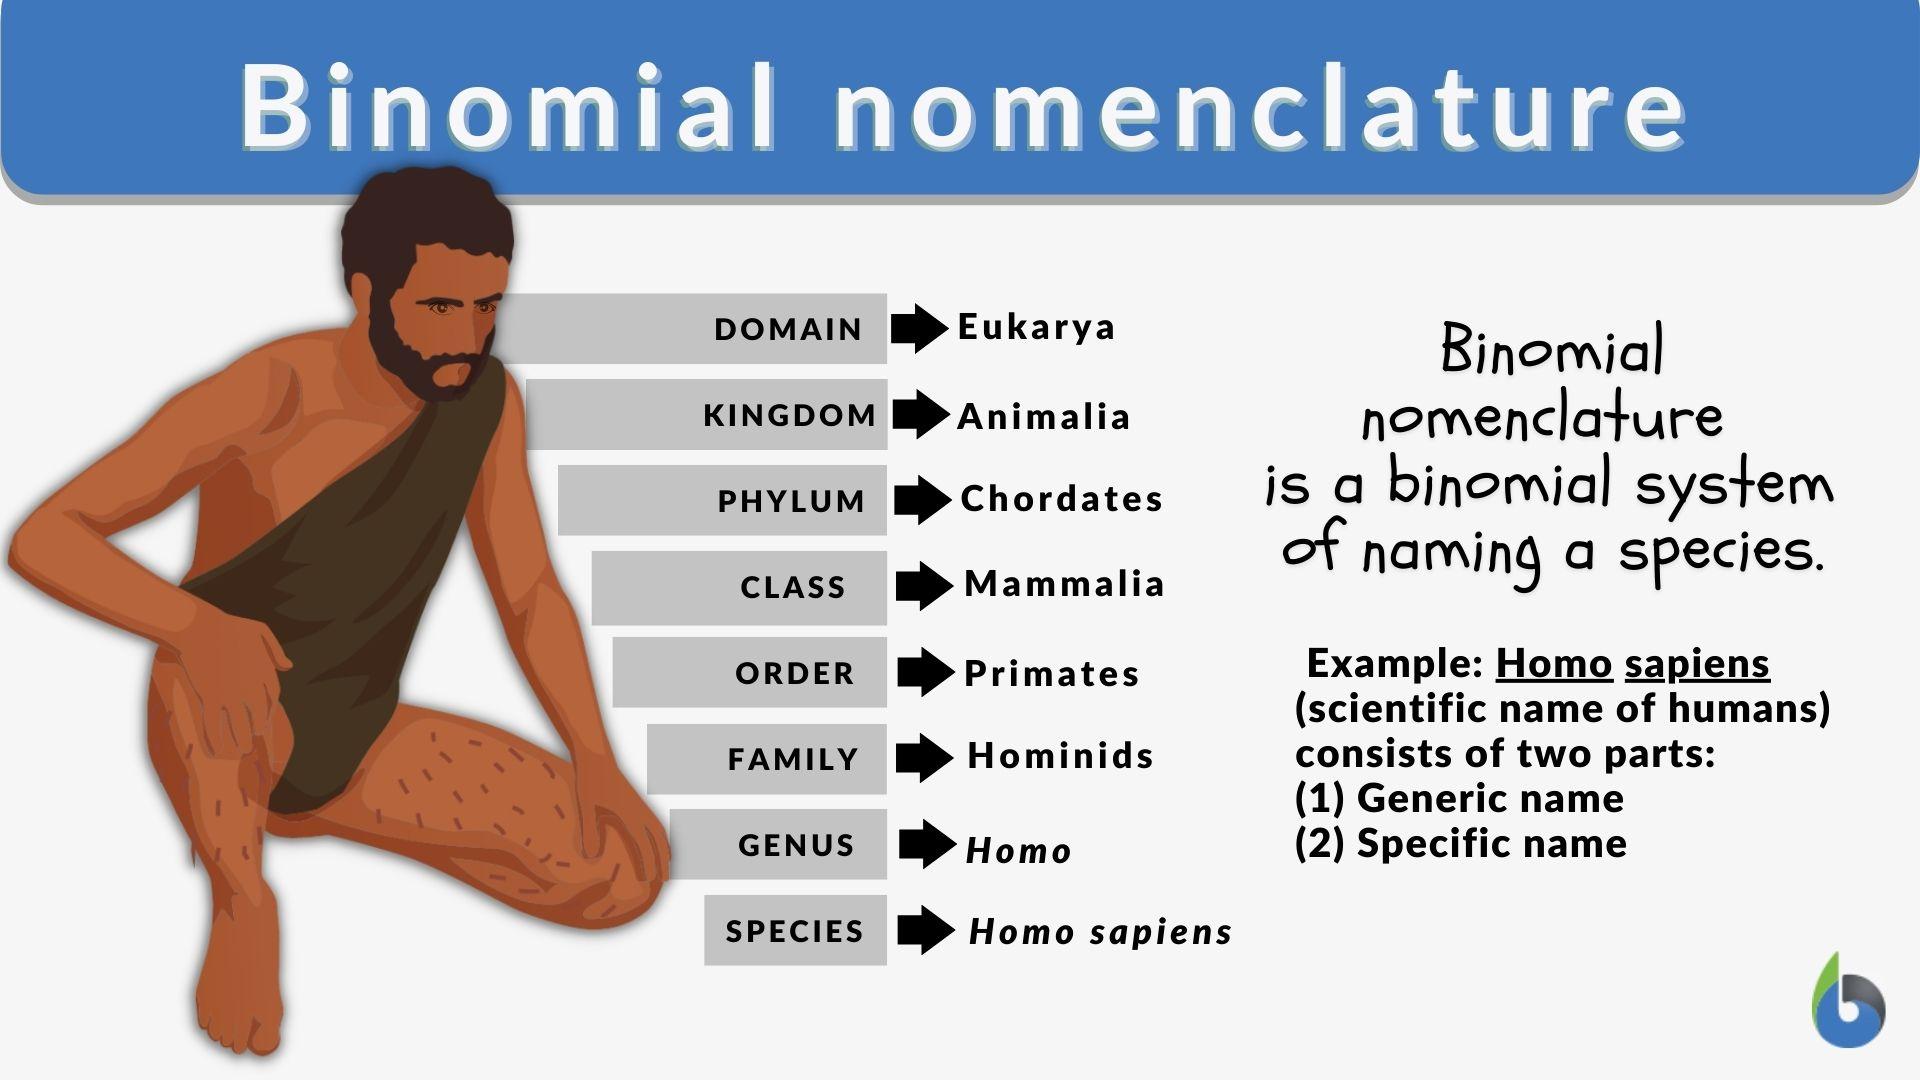 Binomial nomenclature - Definition and Examples - Biology Online Dictionary